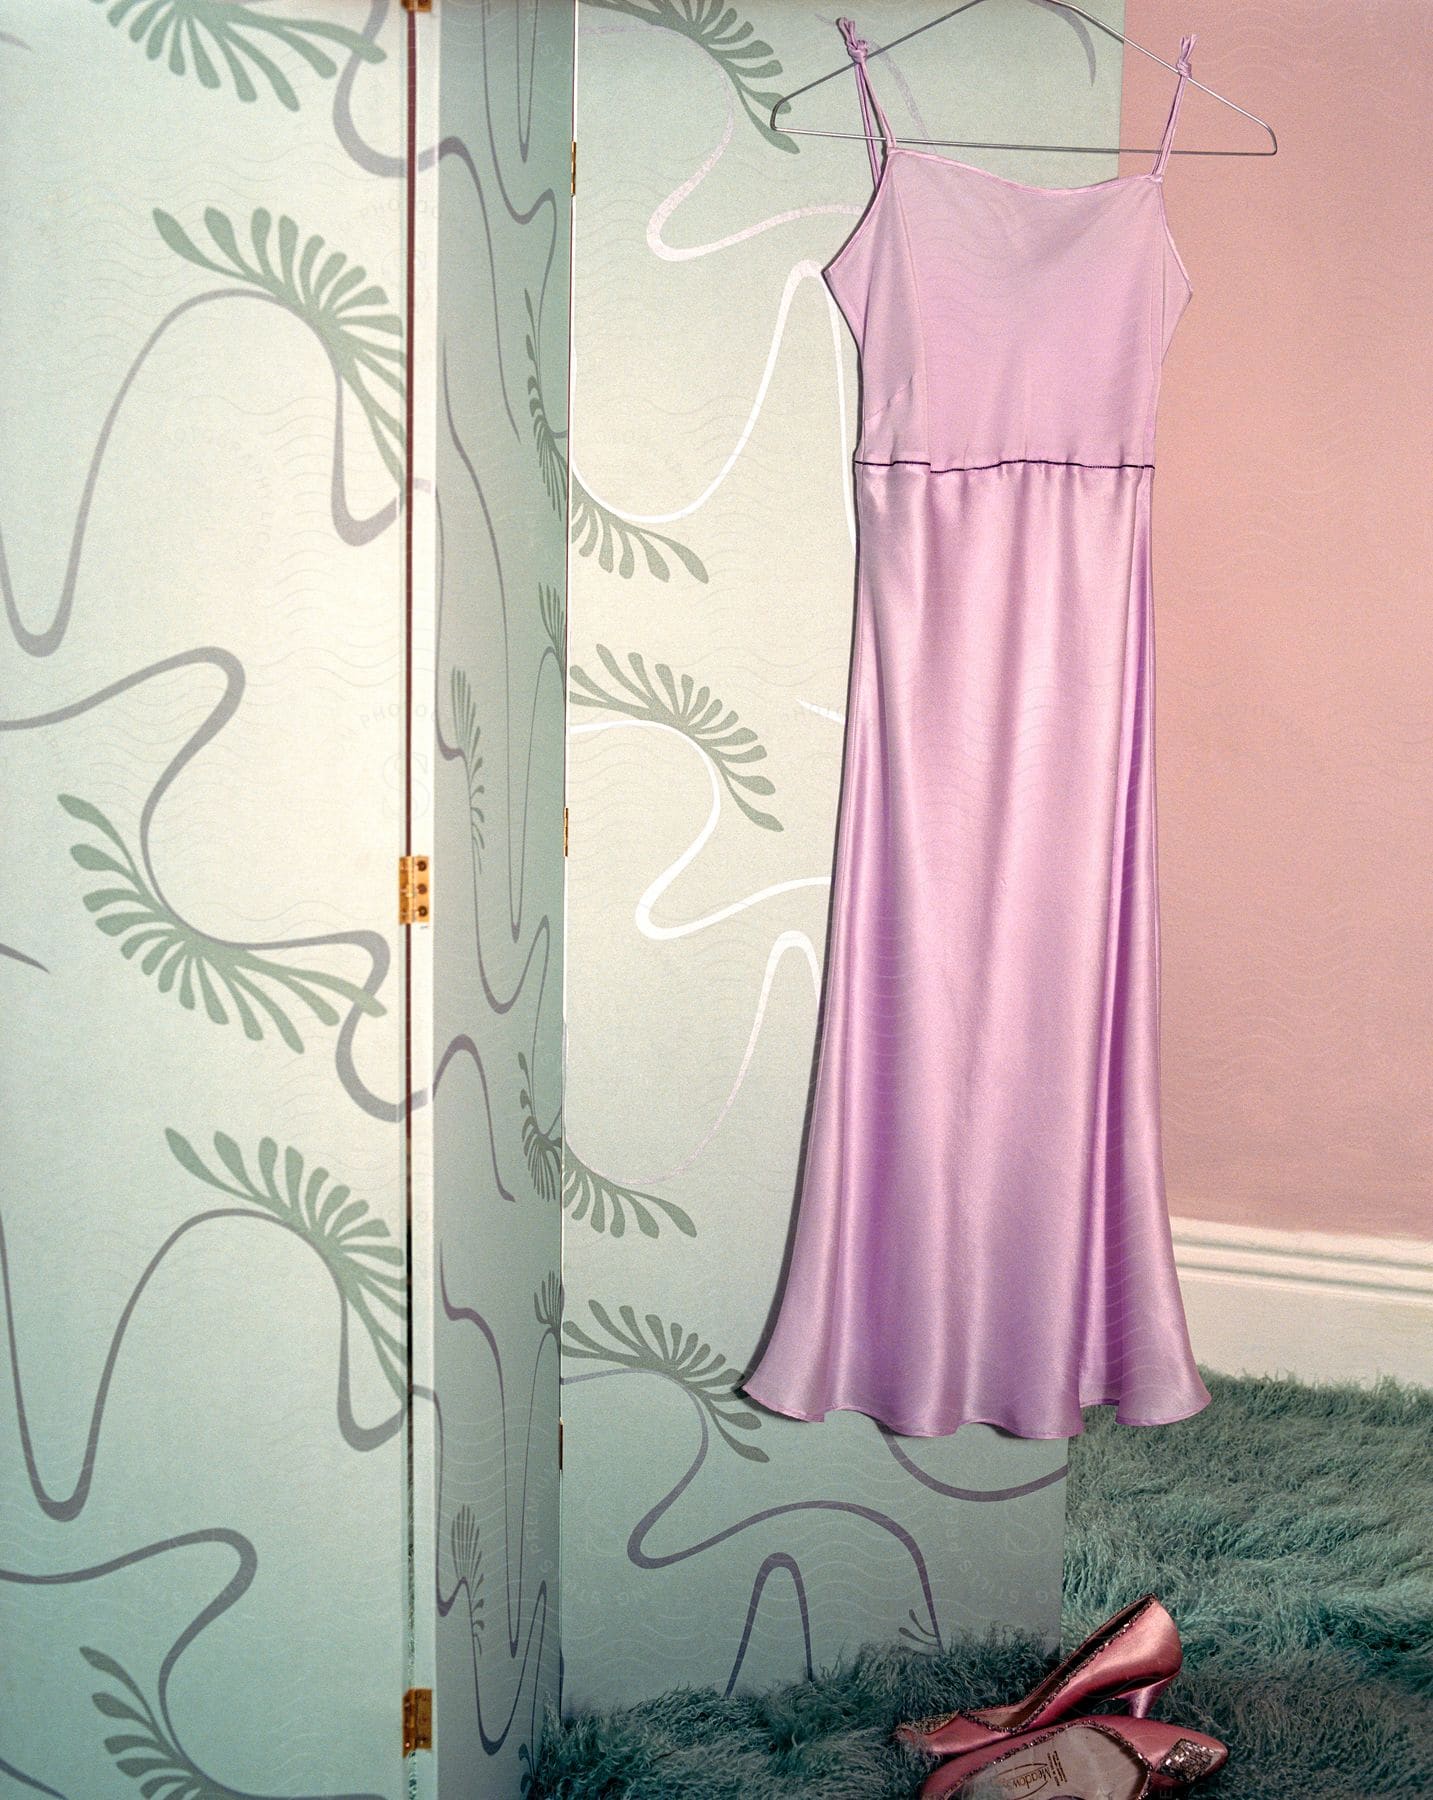 Pink dress hanging on a hanger with pink high heels placed underneath on the floor in a dressing room